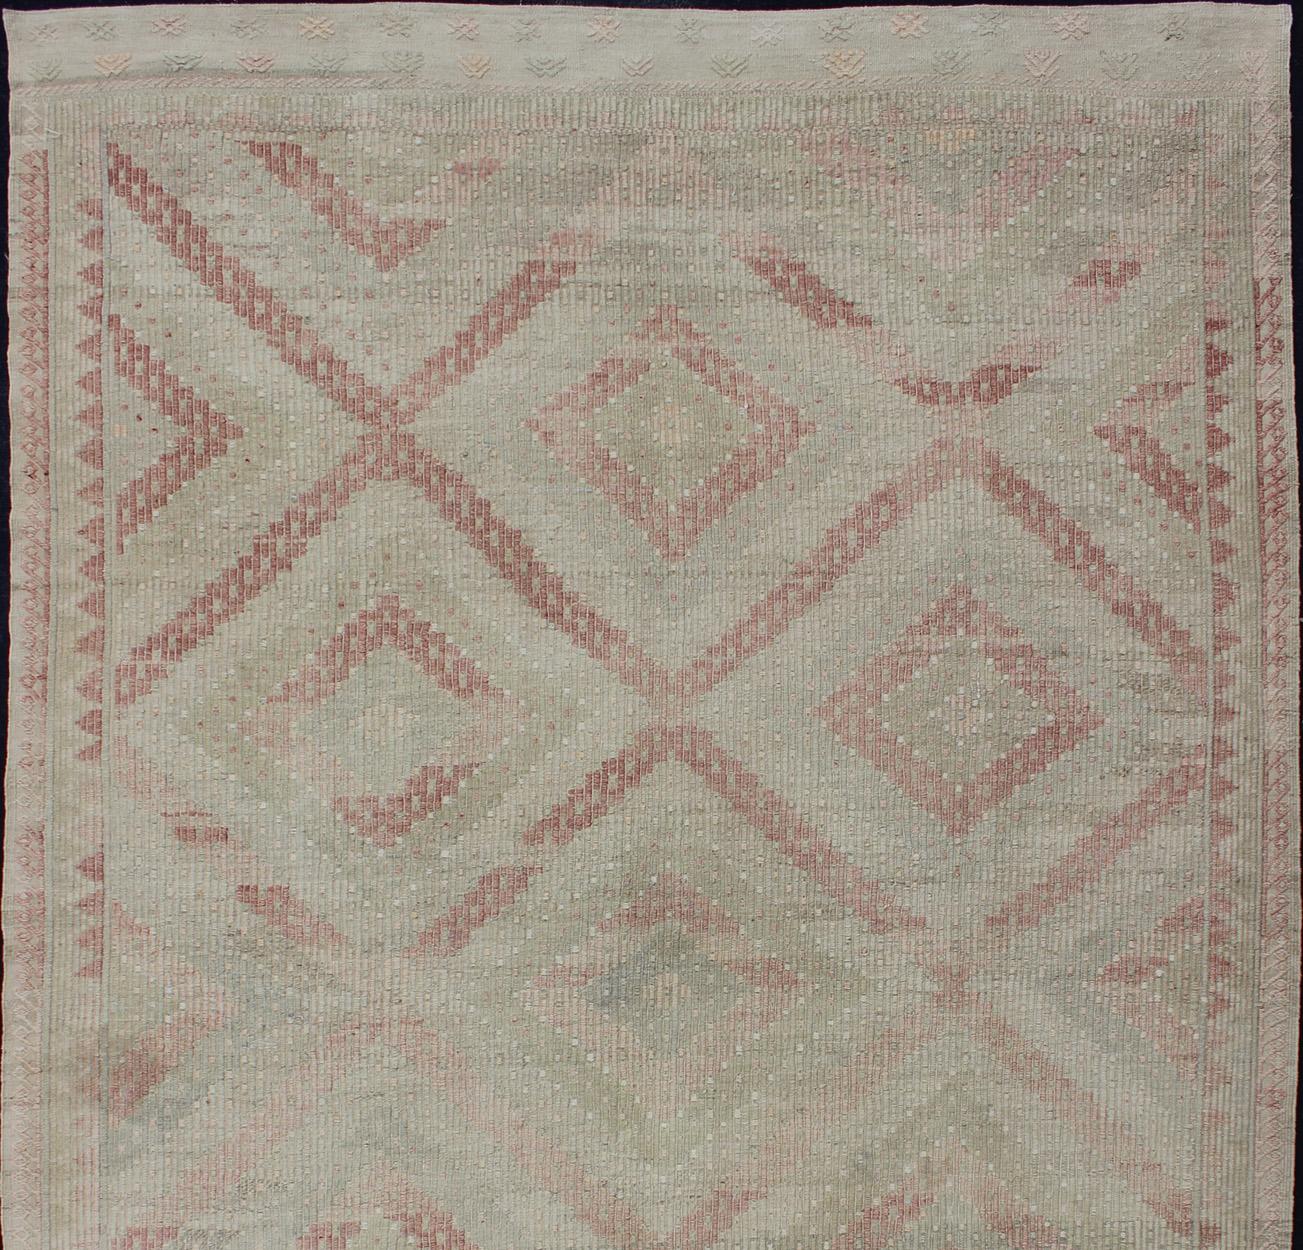 Large Embroidered vintage rug from Turkey in shades of tan, light green, light red, and cream with geometric pattern, rug EN-179324, country of origin / type: Turkey / Kilim, circa 1950.

This geometric embroidered flat weave from Turkey bears a